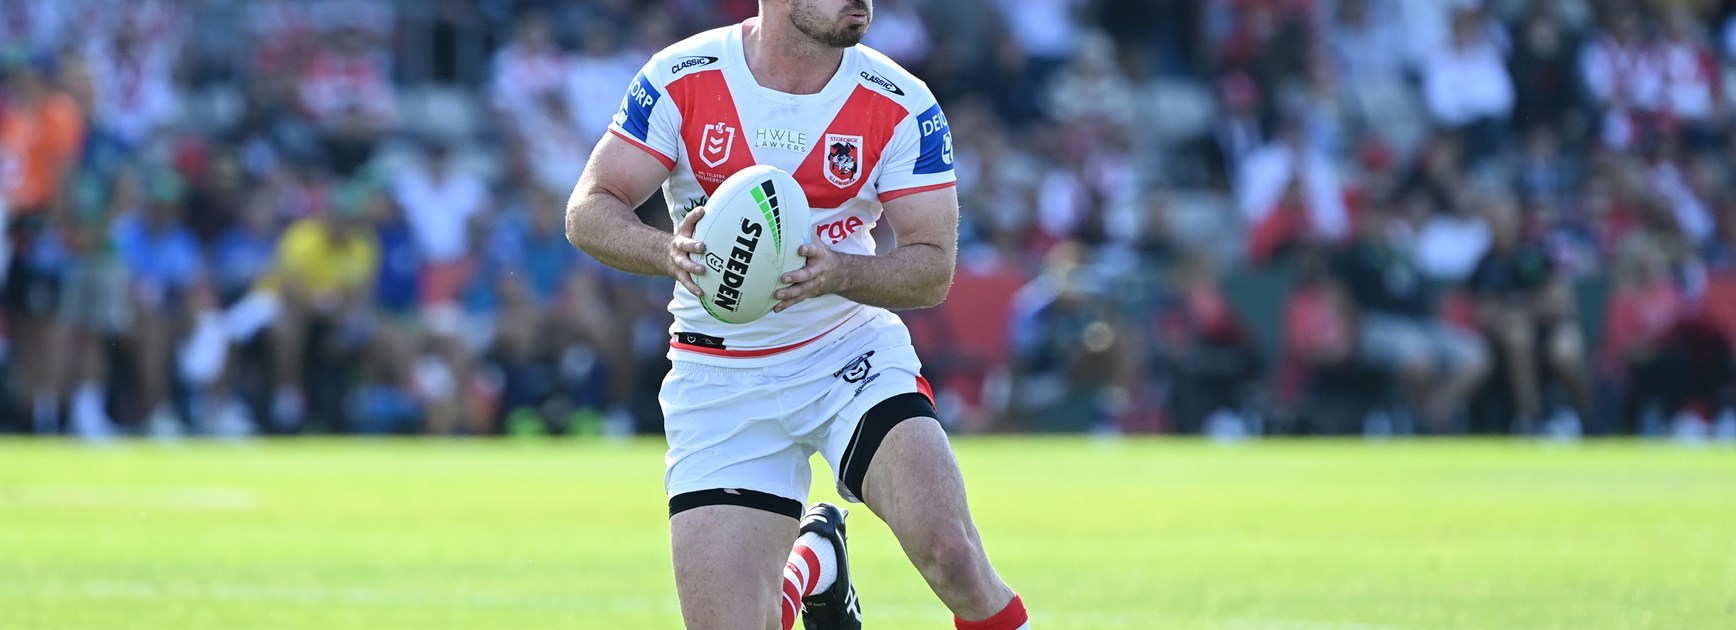 Clune to depart Dragons